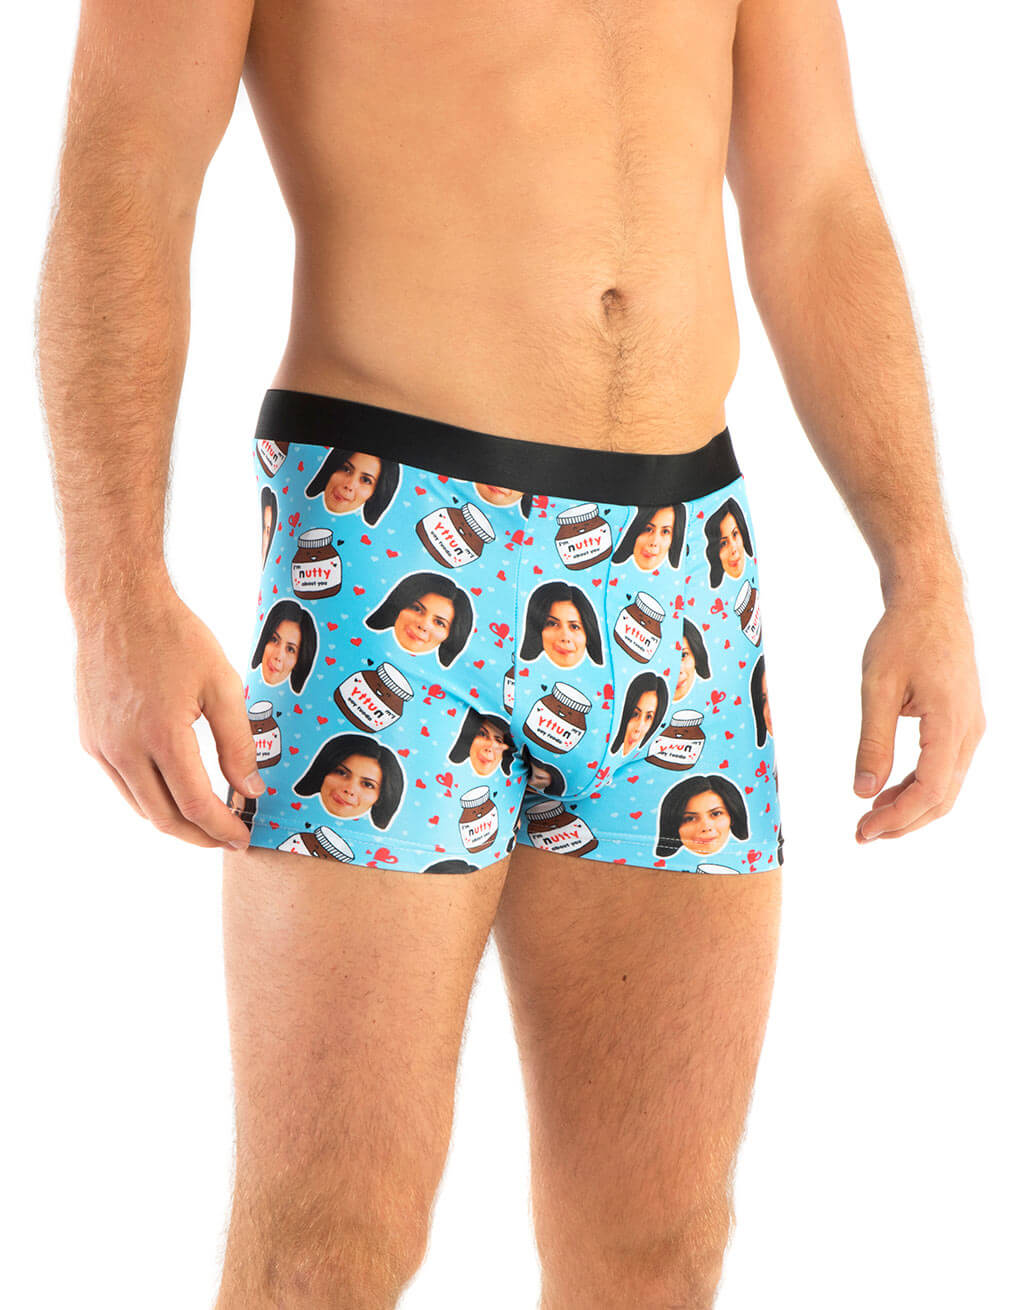 Personalized Funny Face Men's Boxers with Kiss Gift for Him